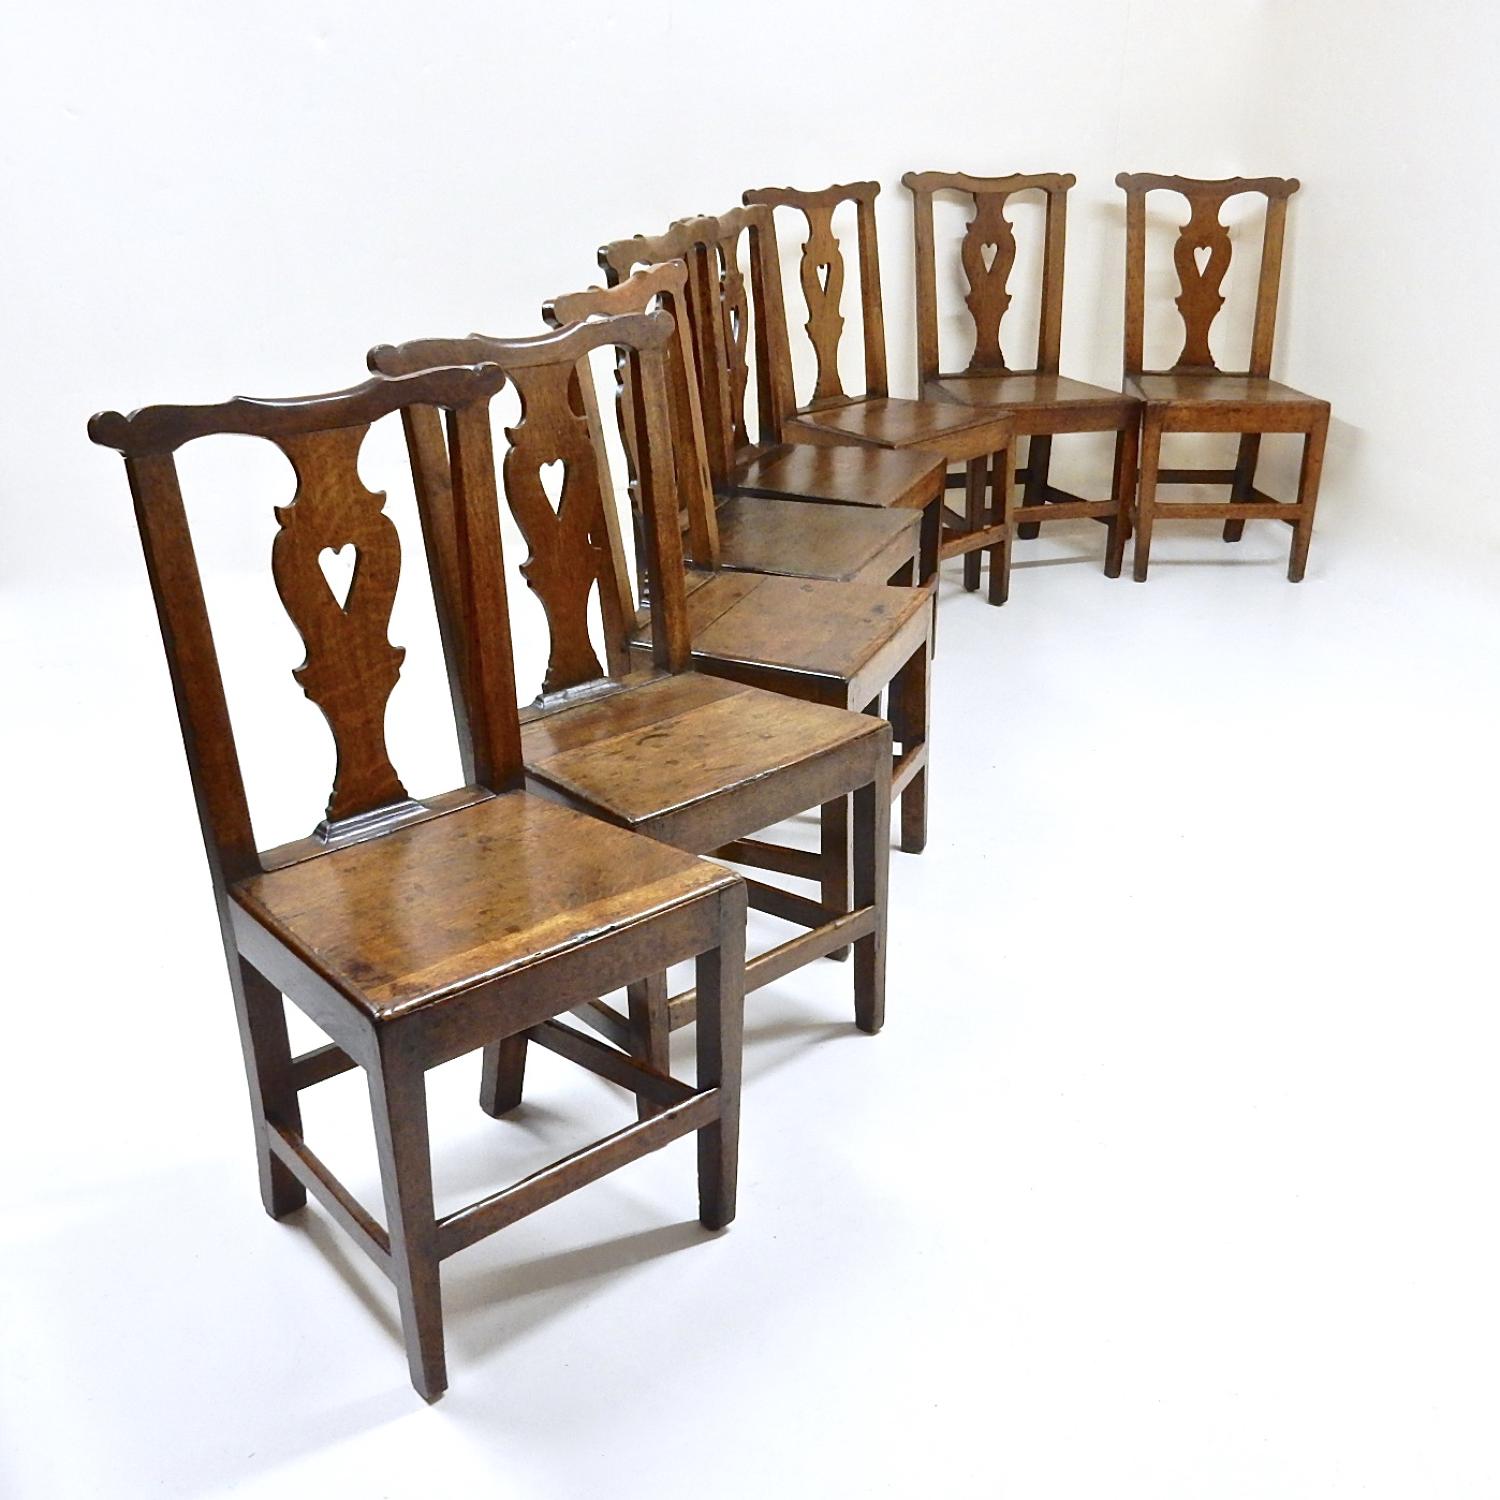 8x Oak Dining Chairs